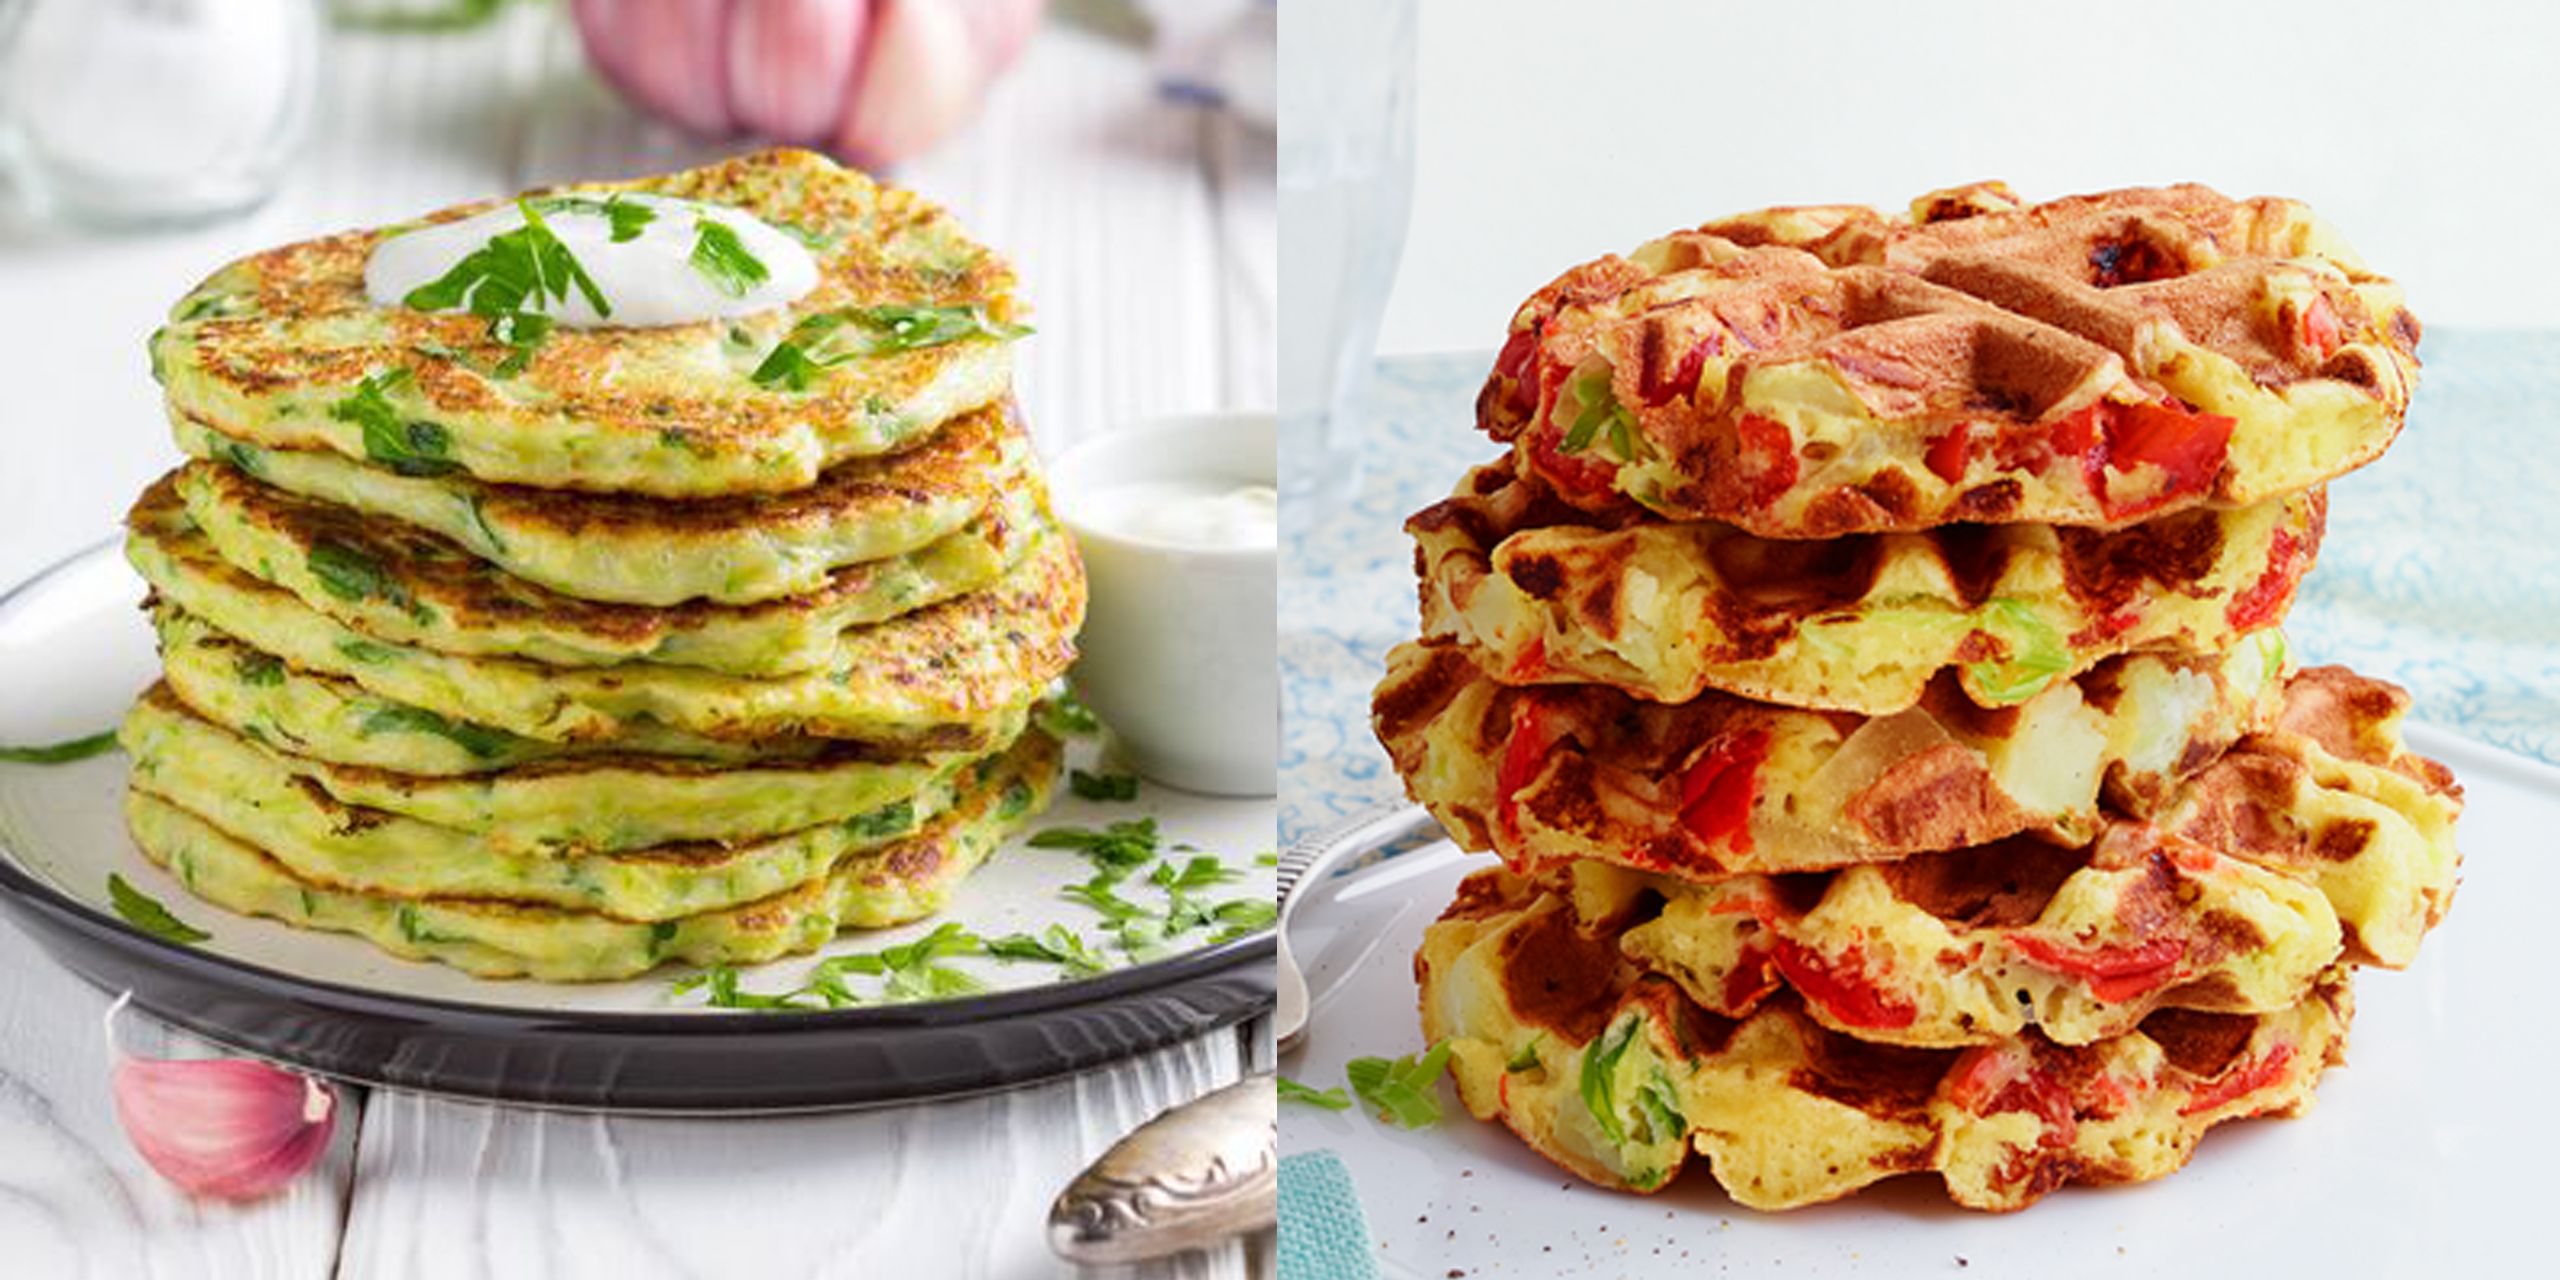 30 Low-Calorie Breakfasts to Keep You Full, According to Dietitians picture pic